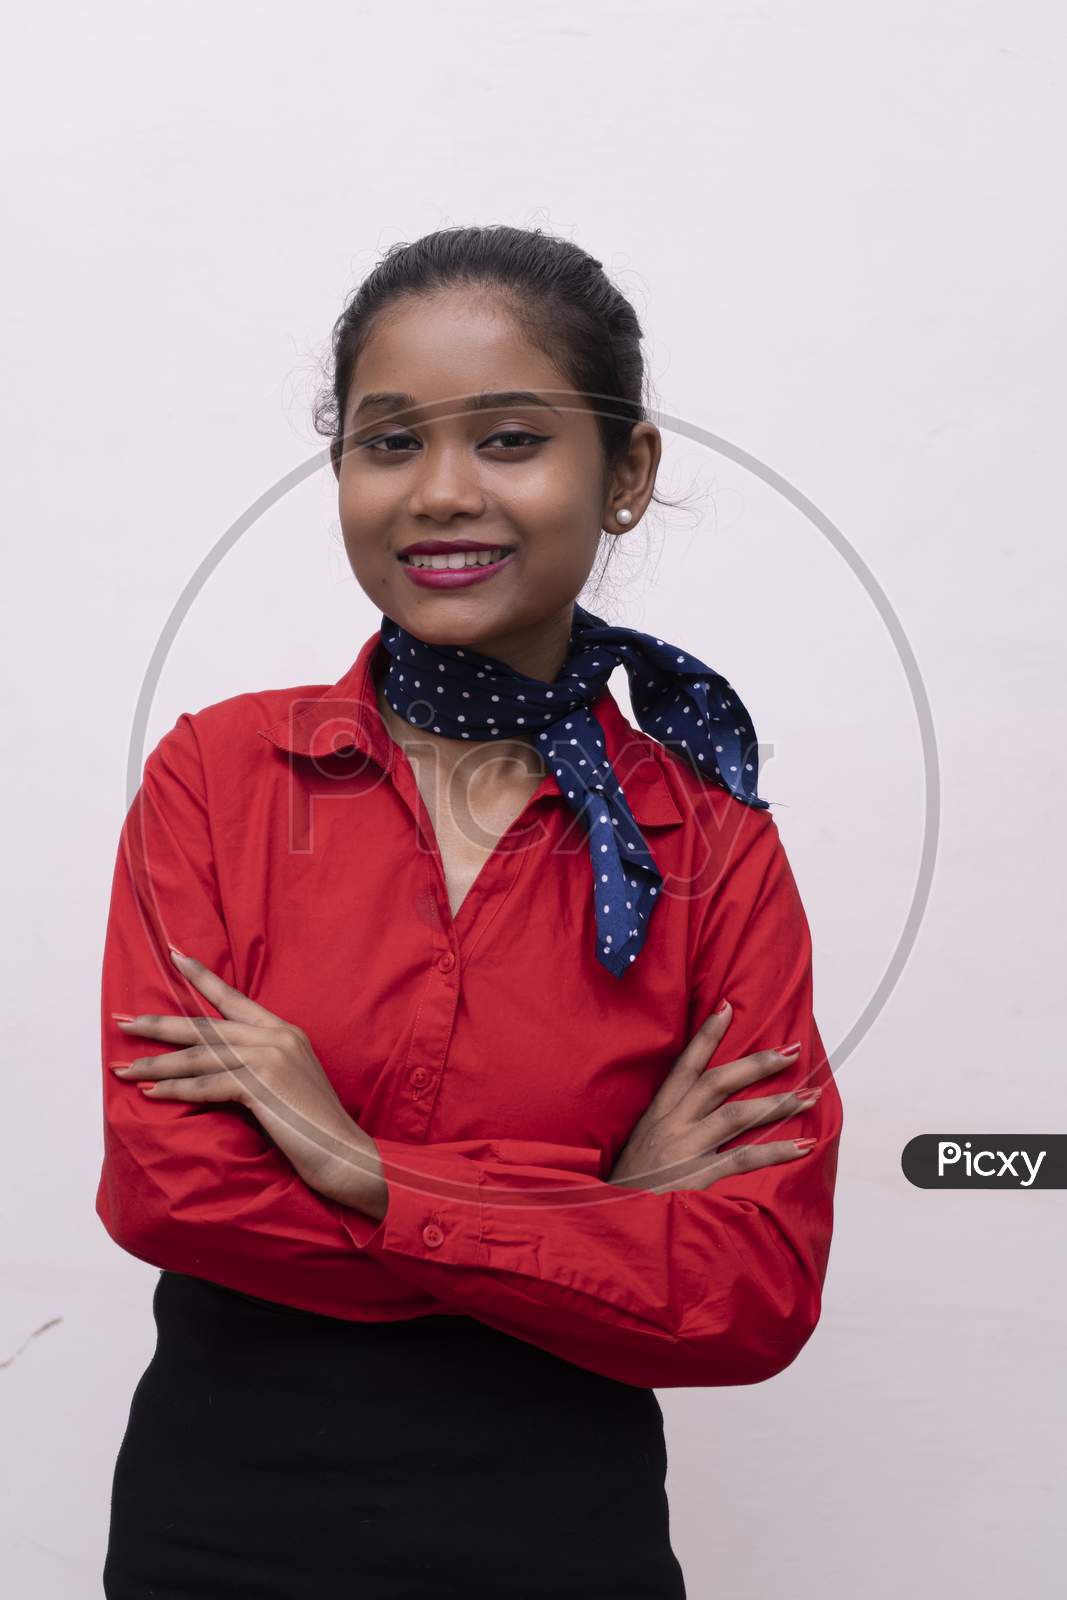 Young Charming Air Hostess In Red Dress With Blue Collar Posing In Front Of The Camera With White Background And Copy Space.